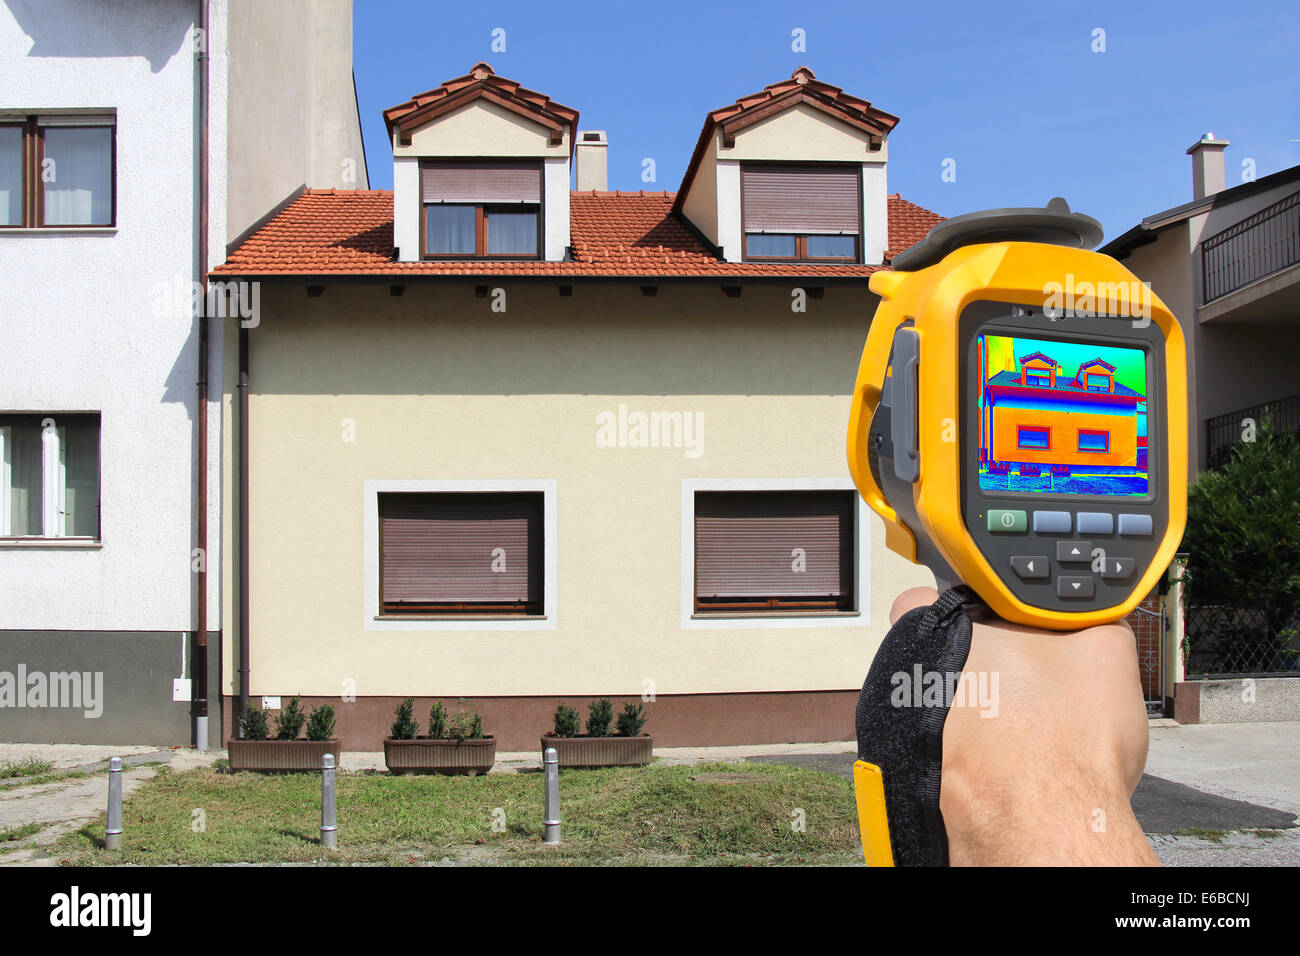 Recording Heat Loss at the House With Infrared Thermal Camera Stock Photo